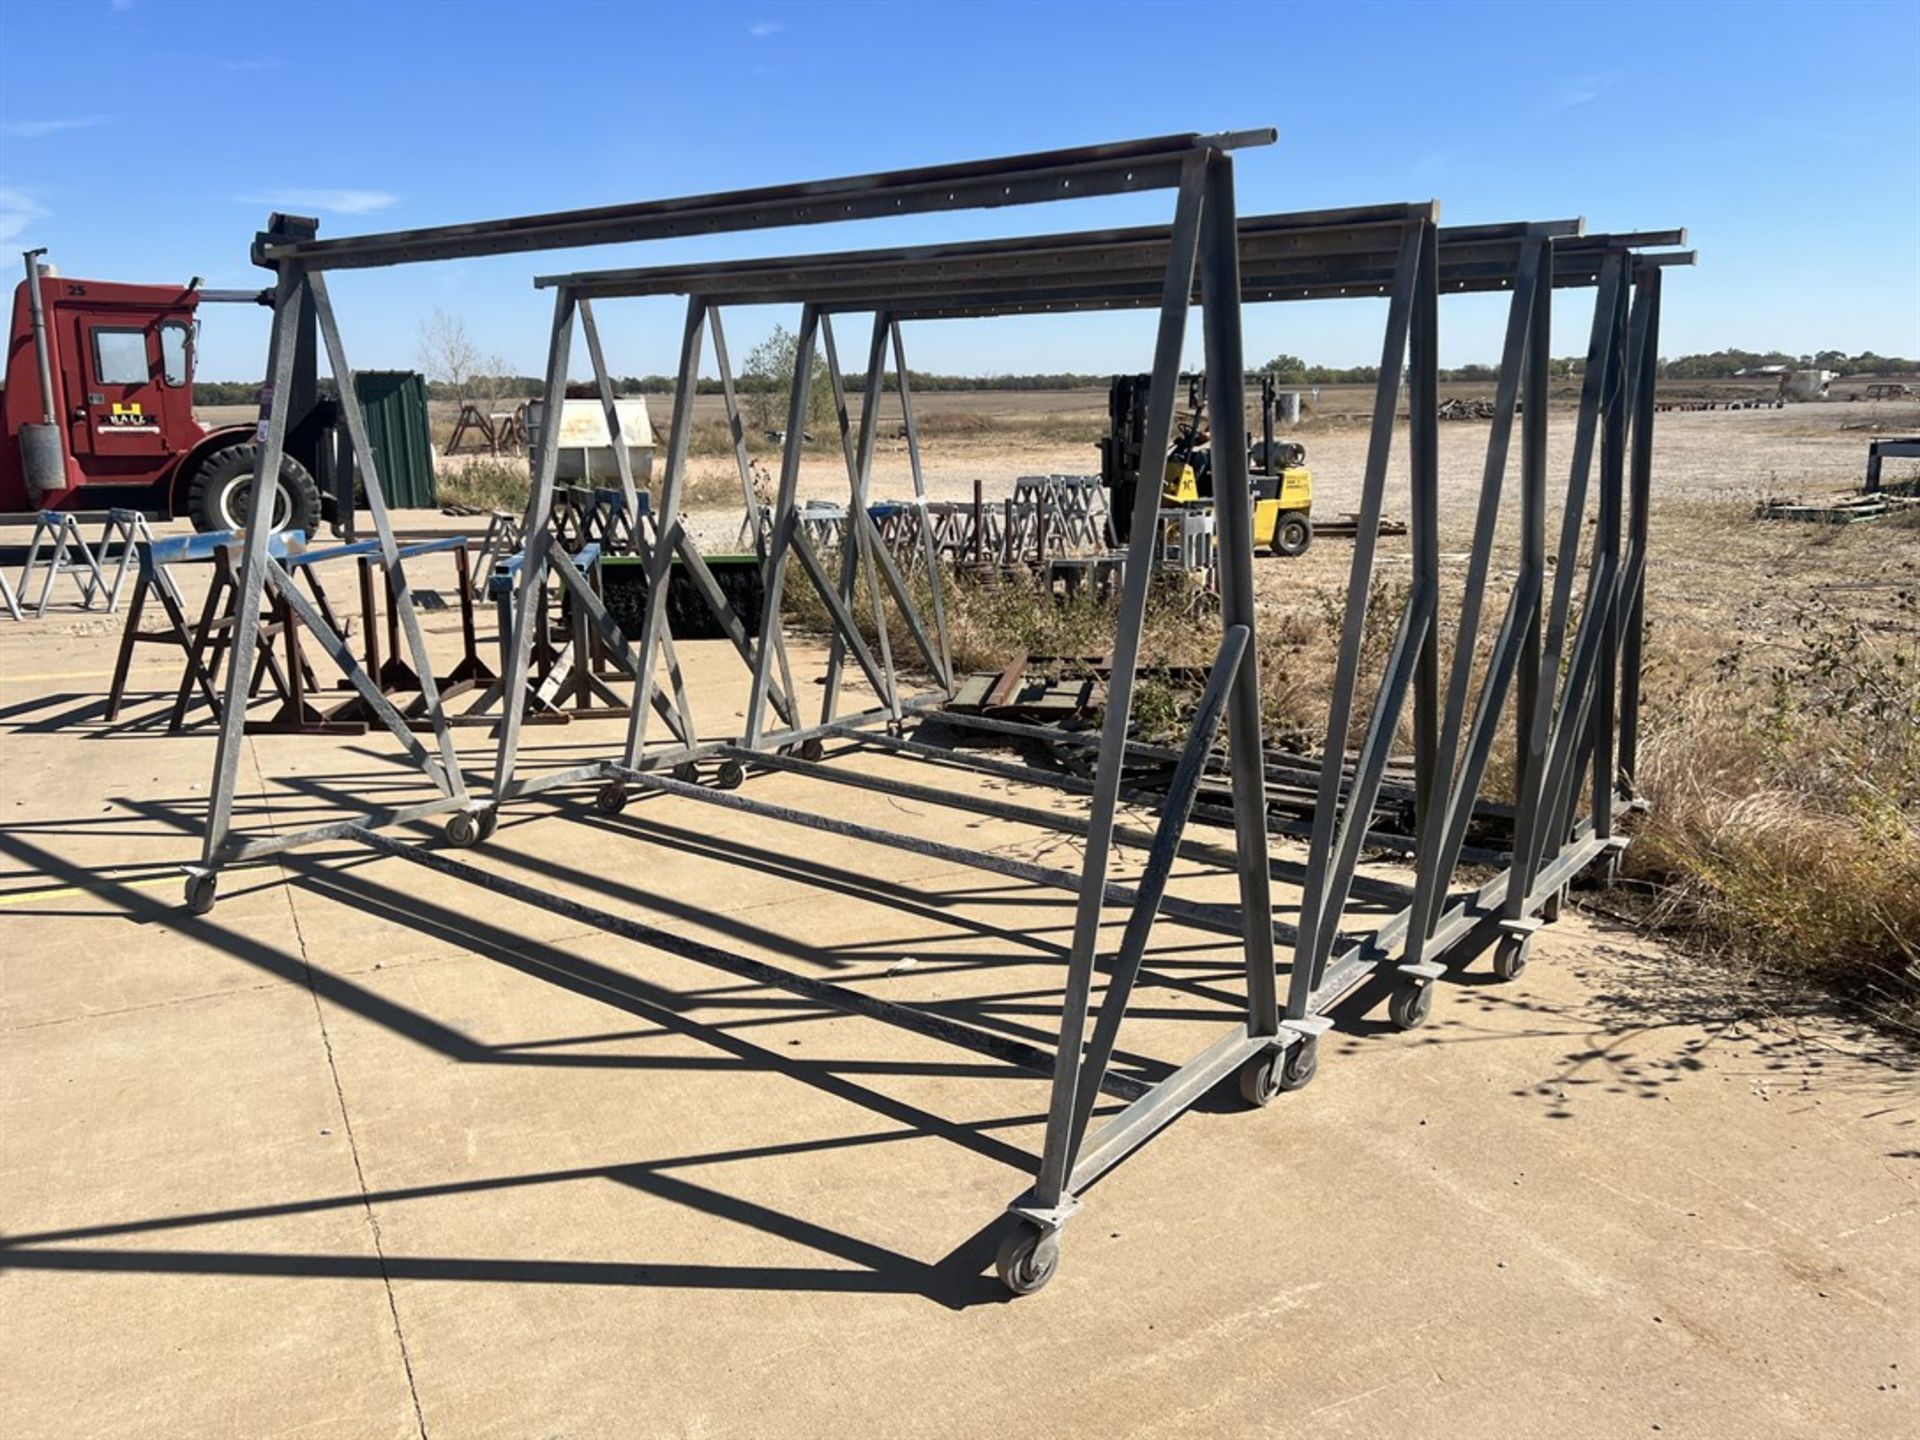 Lot of (5) Paint Drying Racks, 7'H x 11'W - Image 2 of 3